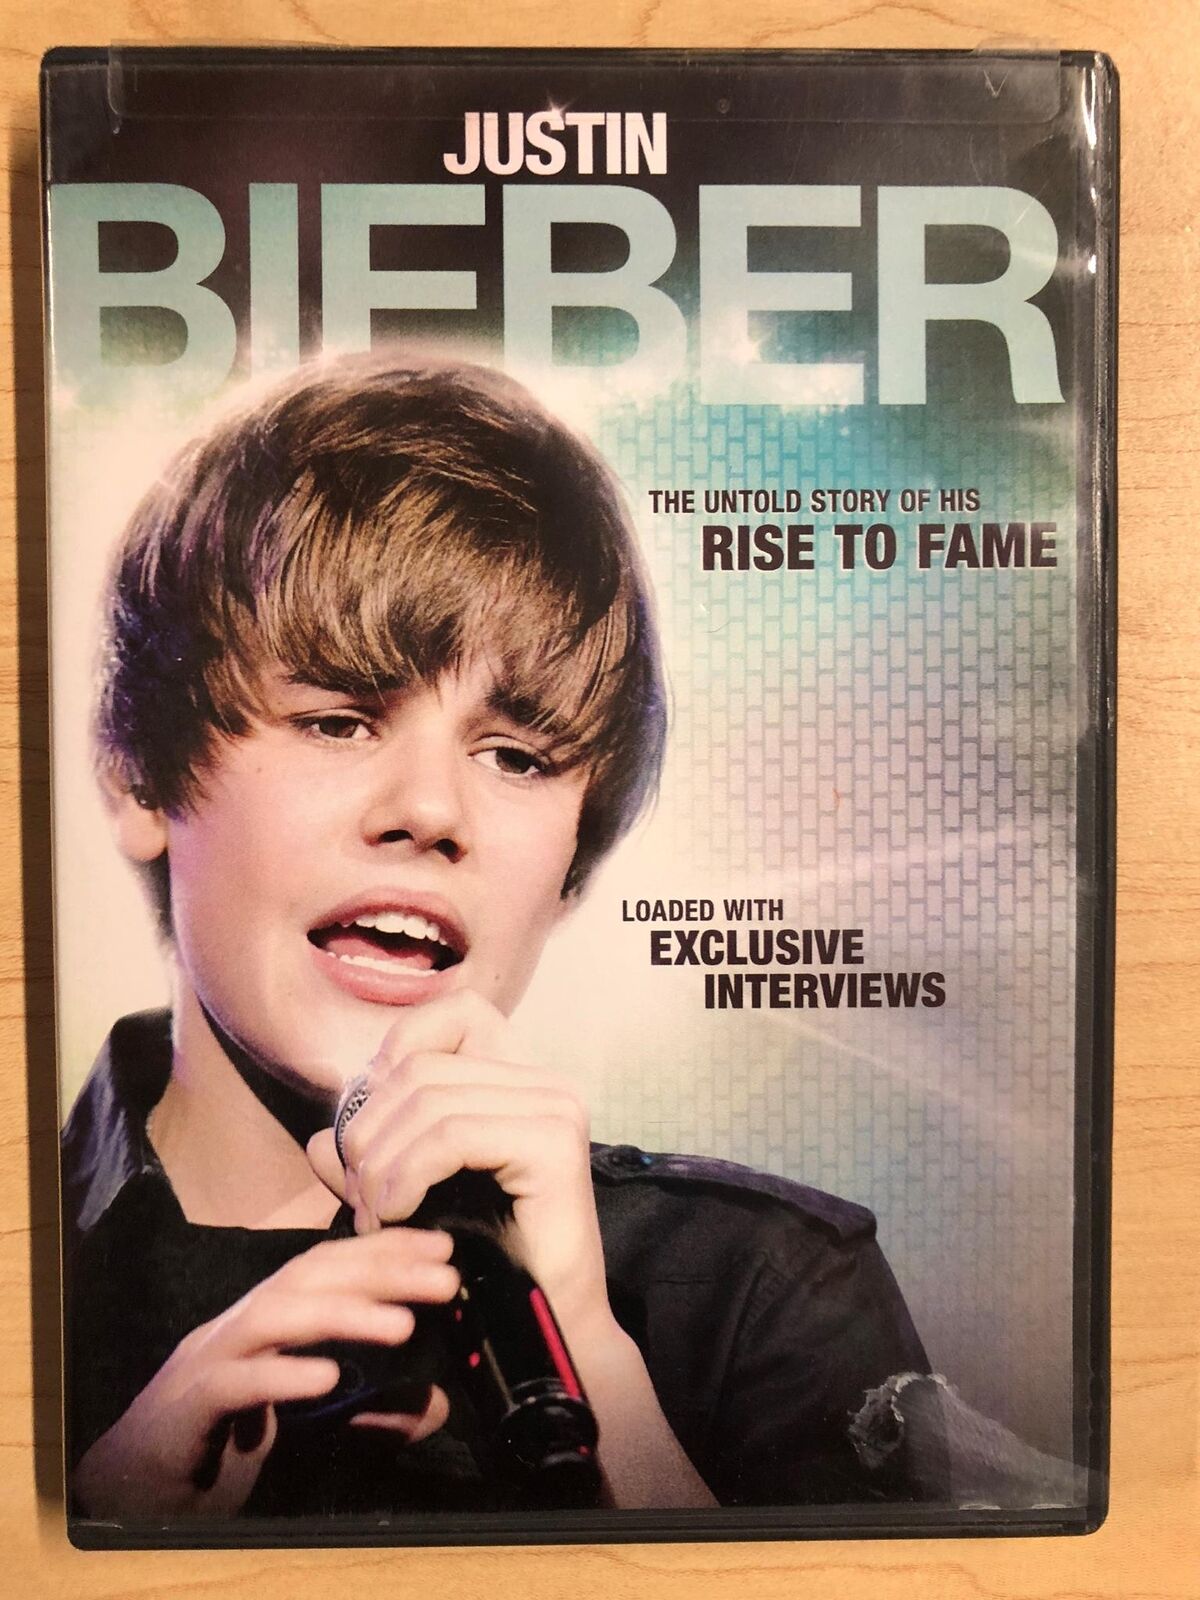 Justin Bieber - The Untold Story of his Rise to Fame (DVD, 2011) - J1231